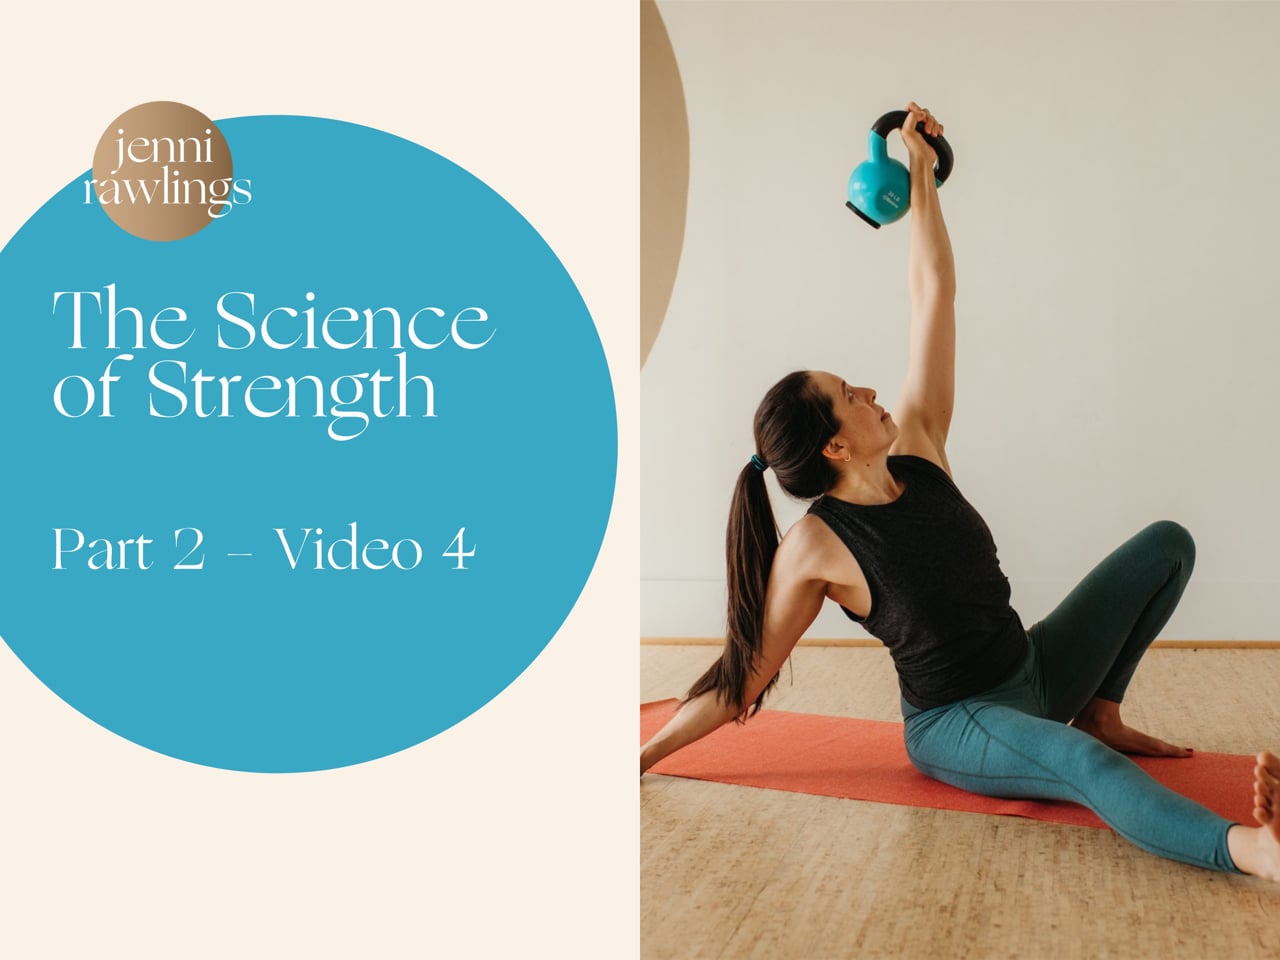 The Science of Strength Part 2, Video 4